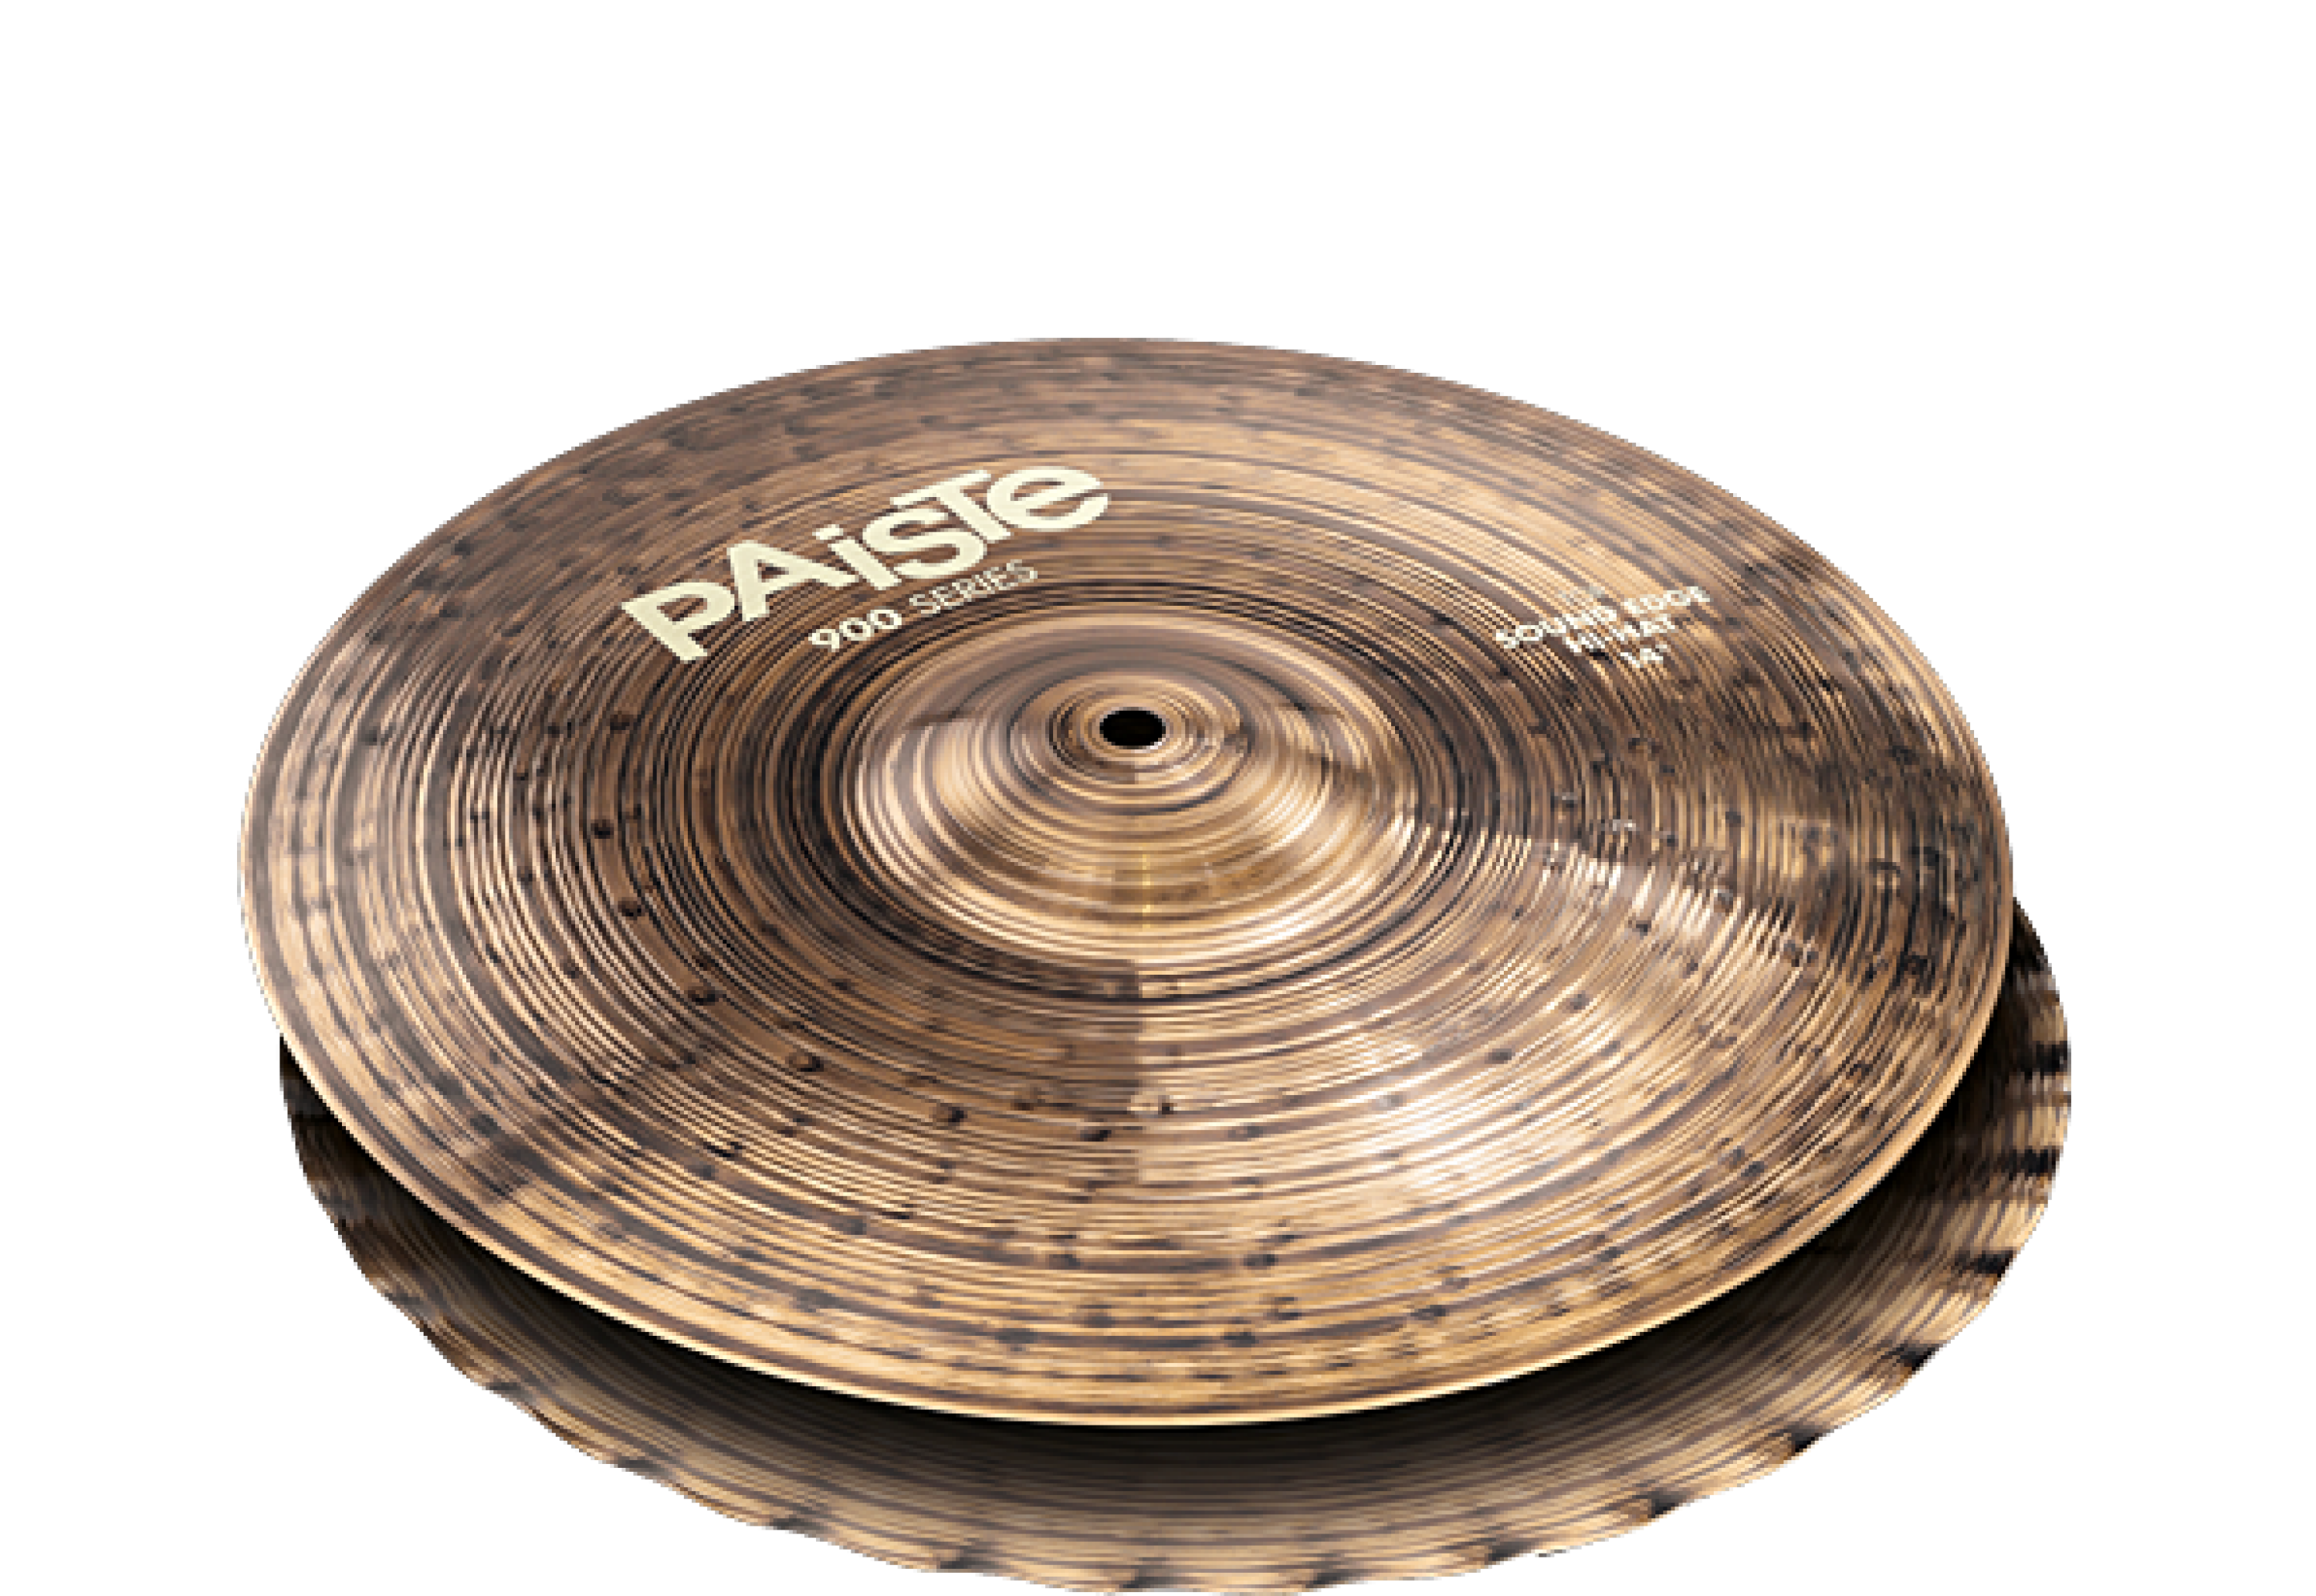 Paiste 14 inch 900 Series Sound Edge Hi-hat Cymbals | Sweetwater